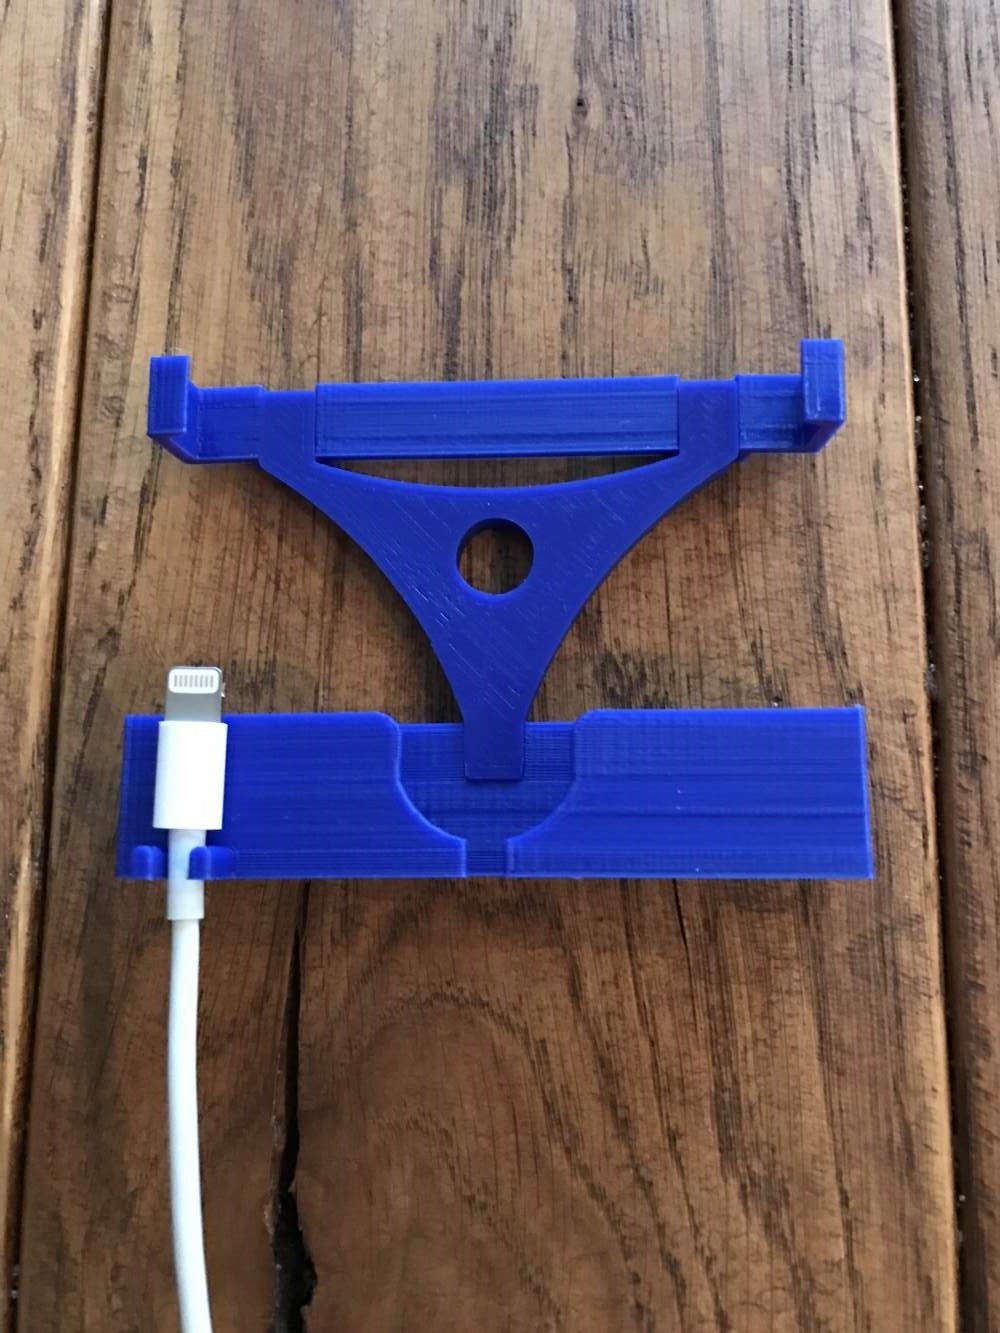 Iphone 7 Plus Wall mount